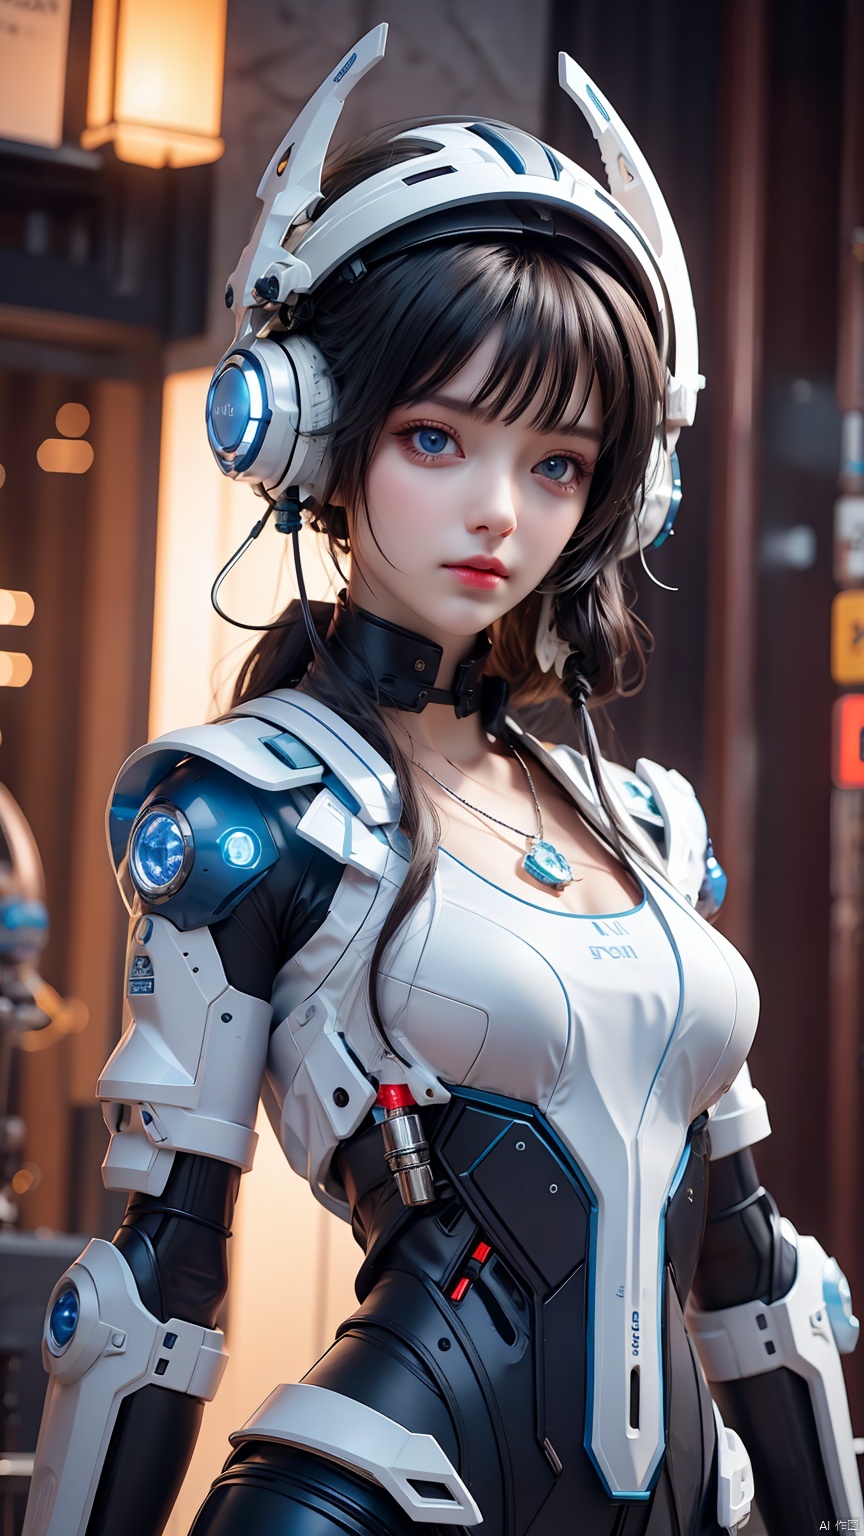  1Girl, blue eyes, glowing, looking at the audience, glowing small mechanical earphones, integrated mechanical earphone helmet, wrapped helmet, white complex structure helmet, mechanical weapon on the left head, white clothing, multi light source mecha helmet, necklace, realistic, black hair, science fiction, single person, close-up, upper body, slanted body, realistic materials, indoor, 1girl,Cyberpunk